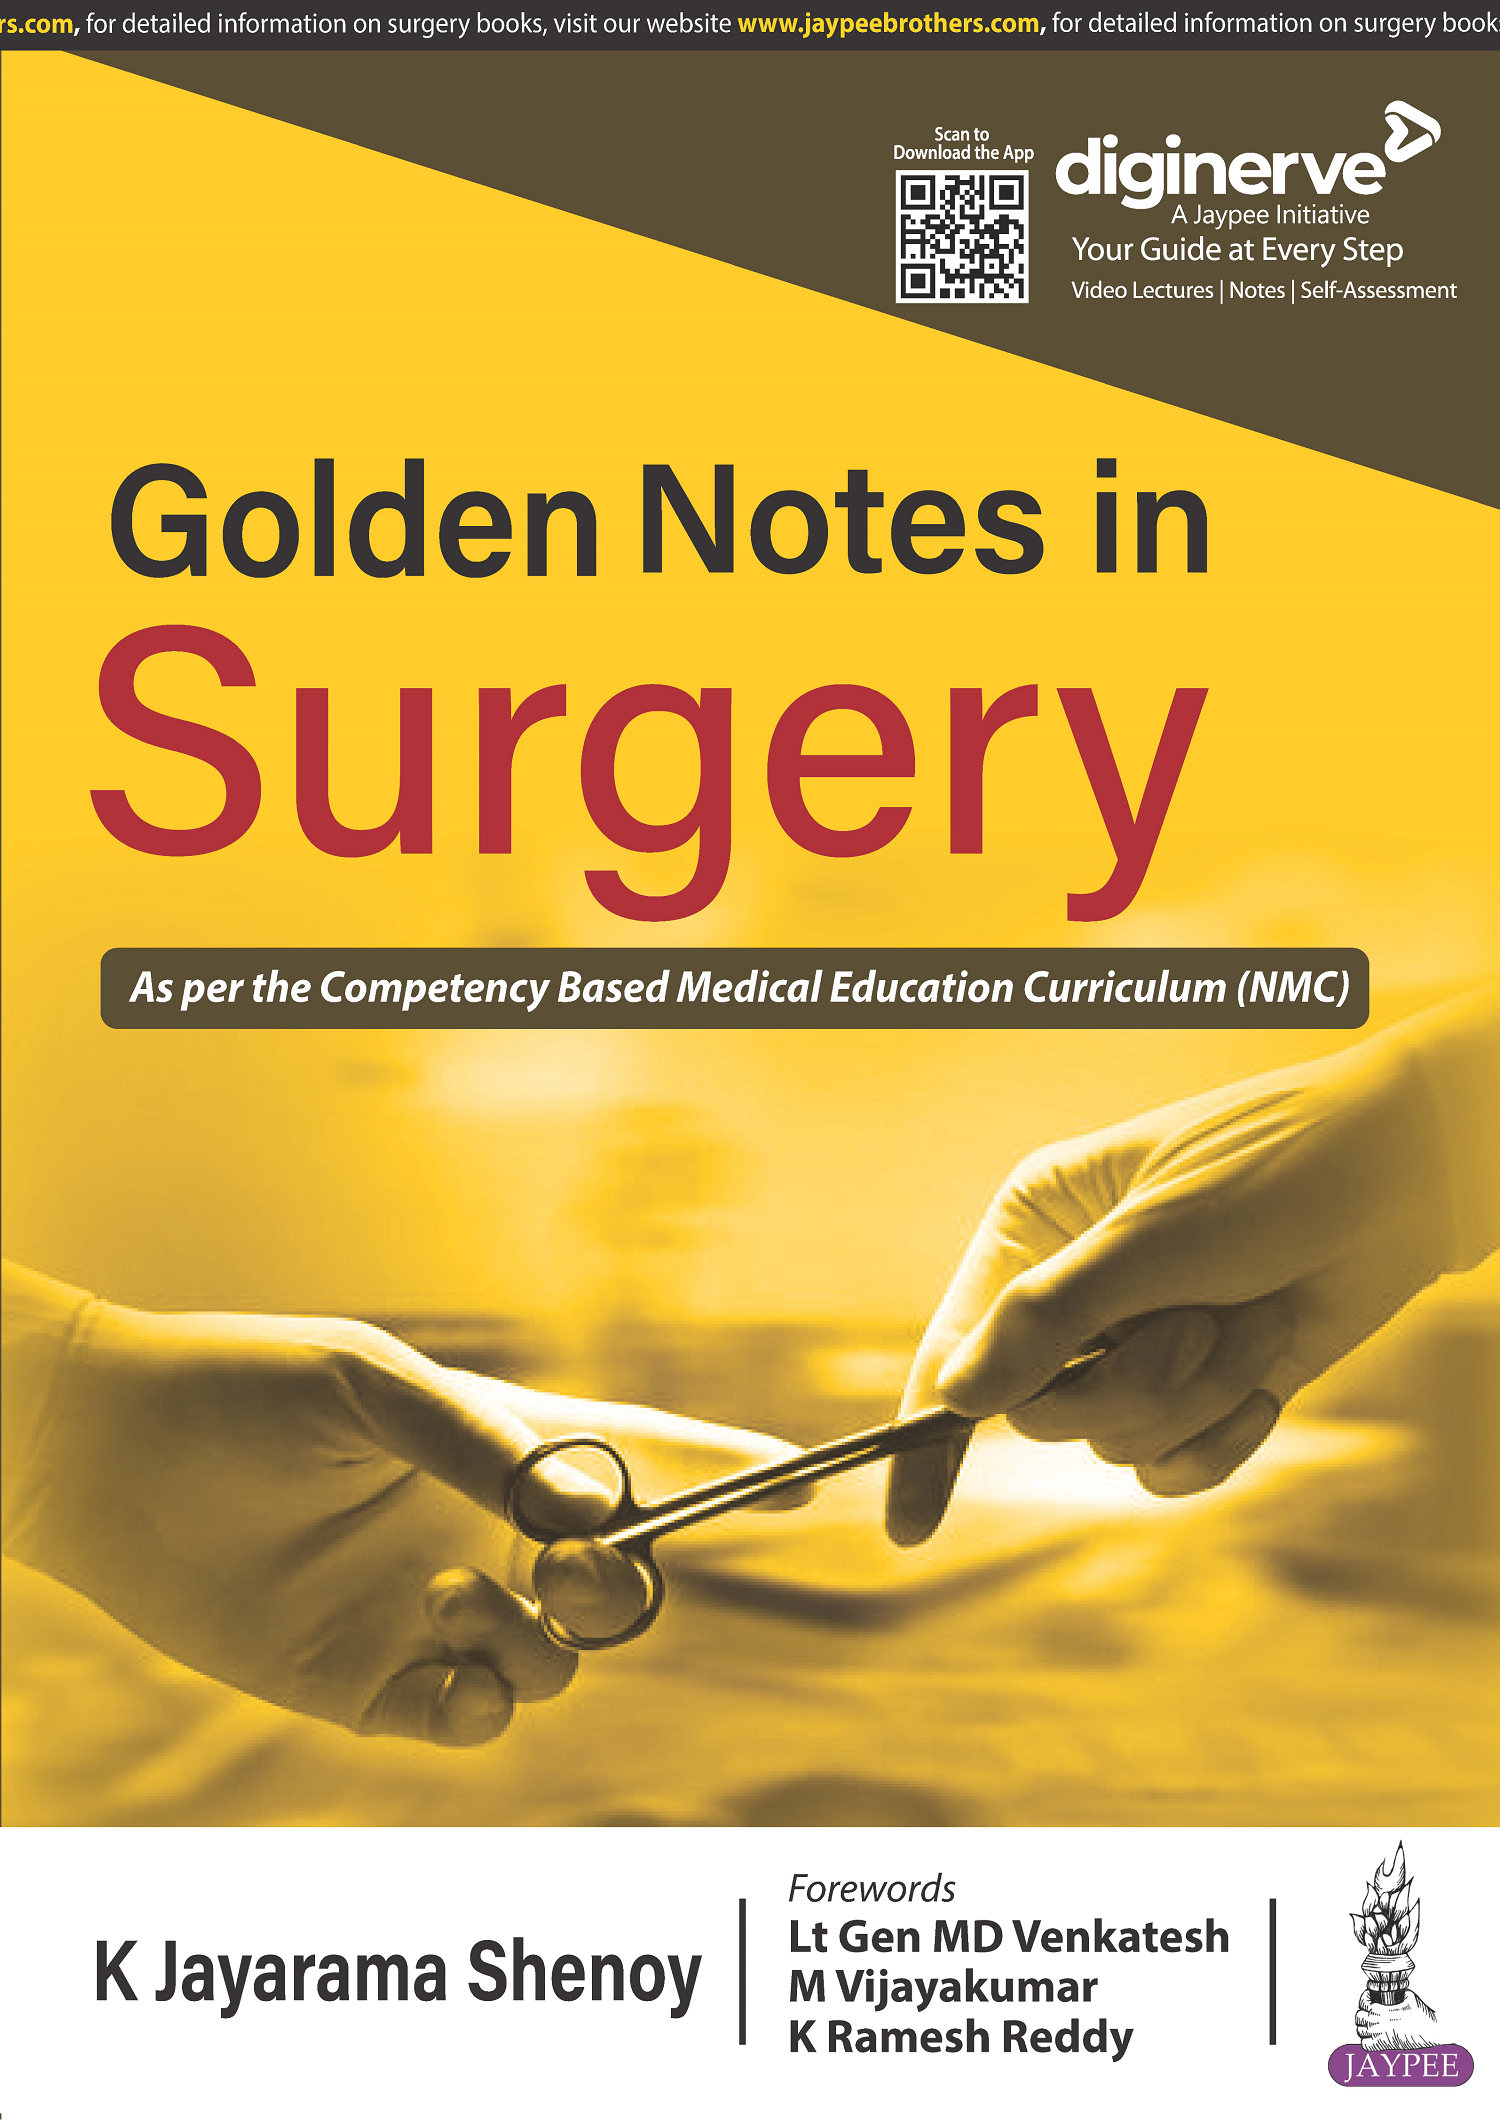 Golden Notes in Surgery